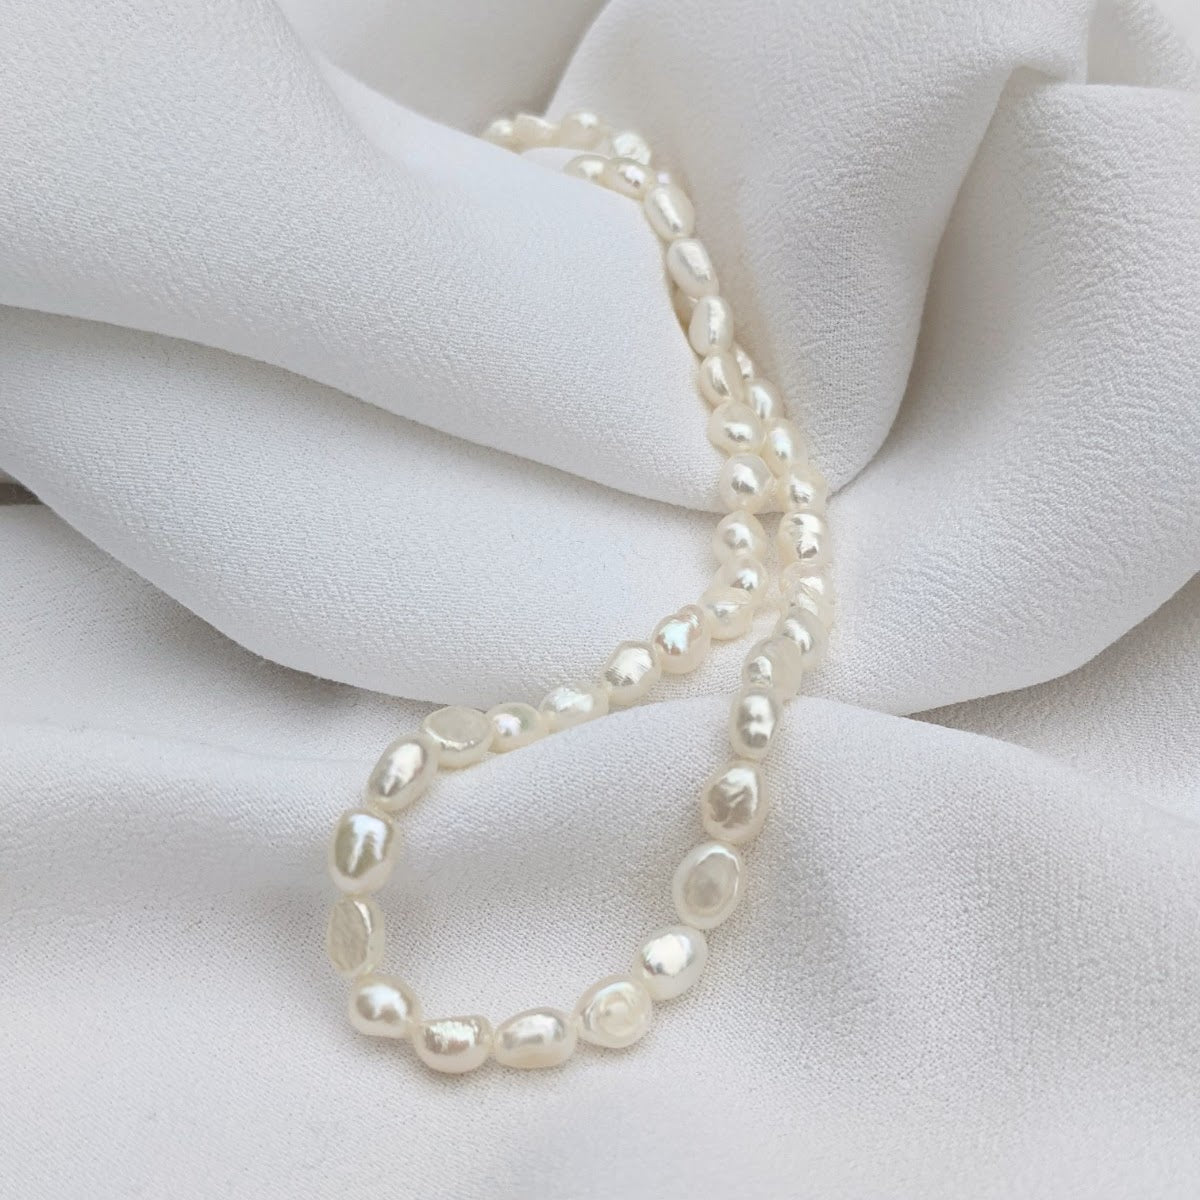 Irregular baroque pearl necklace on soft white fabric